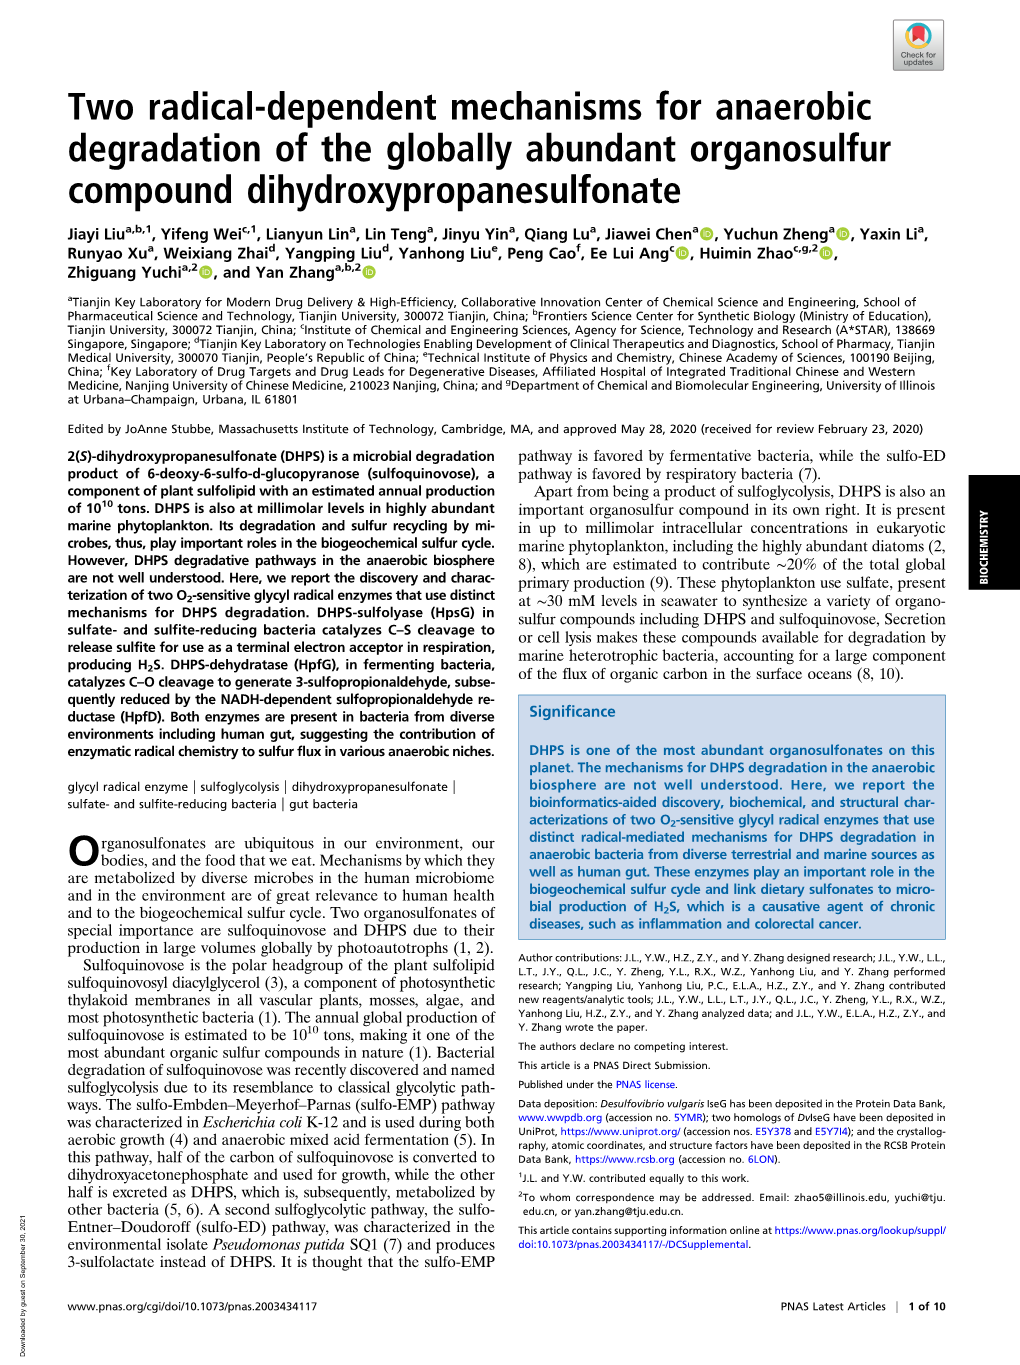 Two Radical-Dependent Mechanisms for Anaerobic Degradation of the Globally Abundant Organosulfur Compound Dihydroxypropanesulfonate